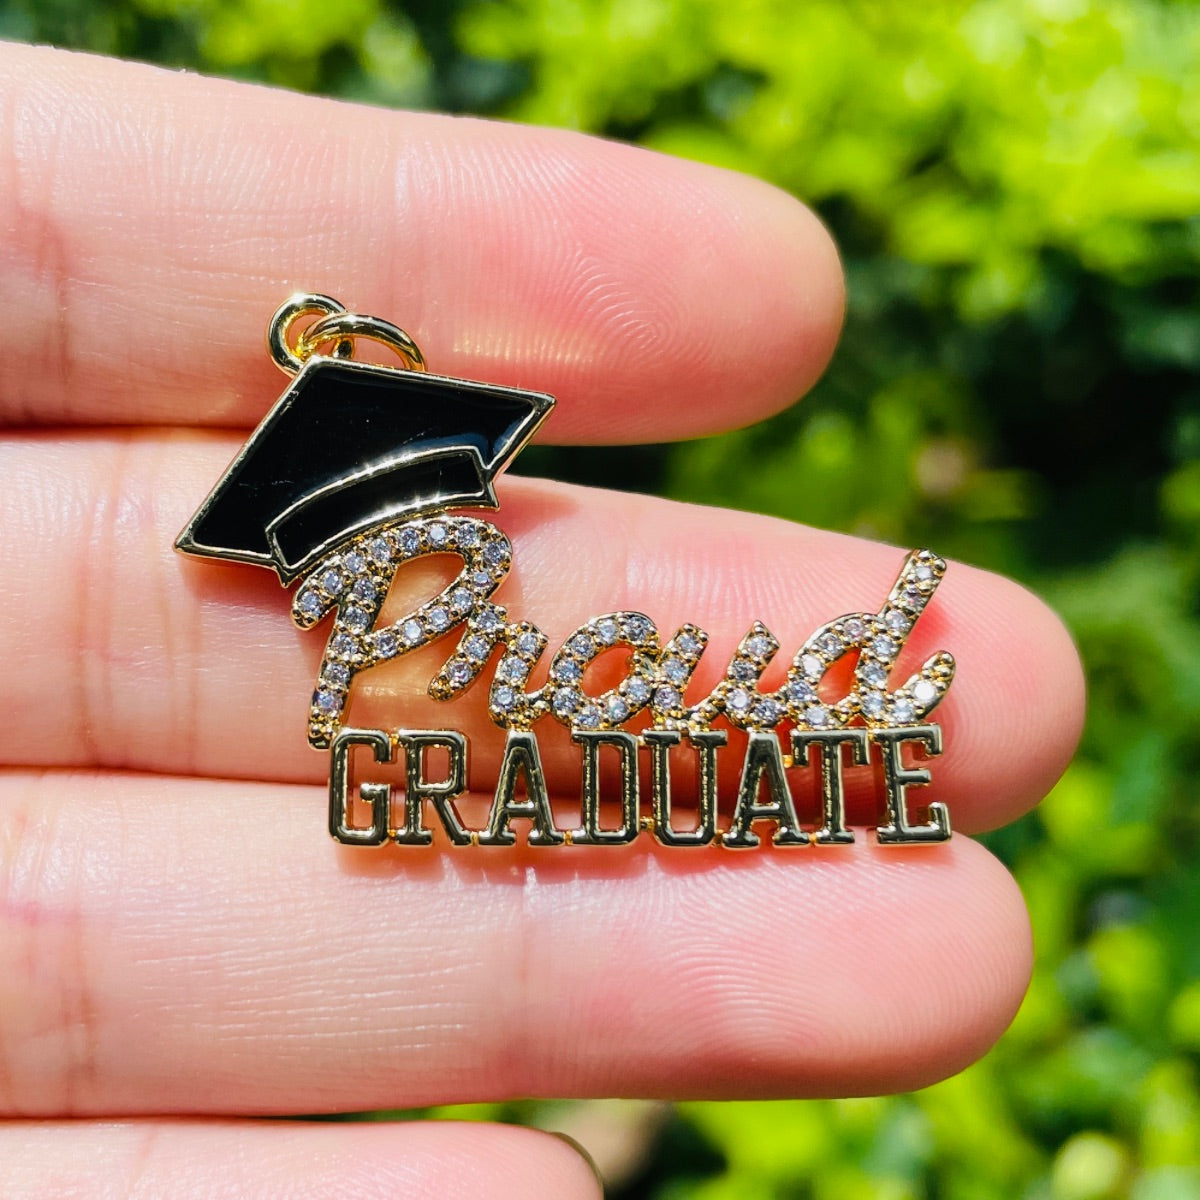 10pcs/lot 34.5*24.5mm CZ Pave Proud Graduate Word Charms for Graduation CZ Paved Charms Graduation New Charms Arrivals Words & Quotes Charms Beads Beyond